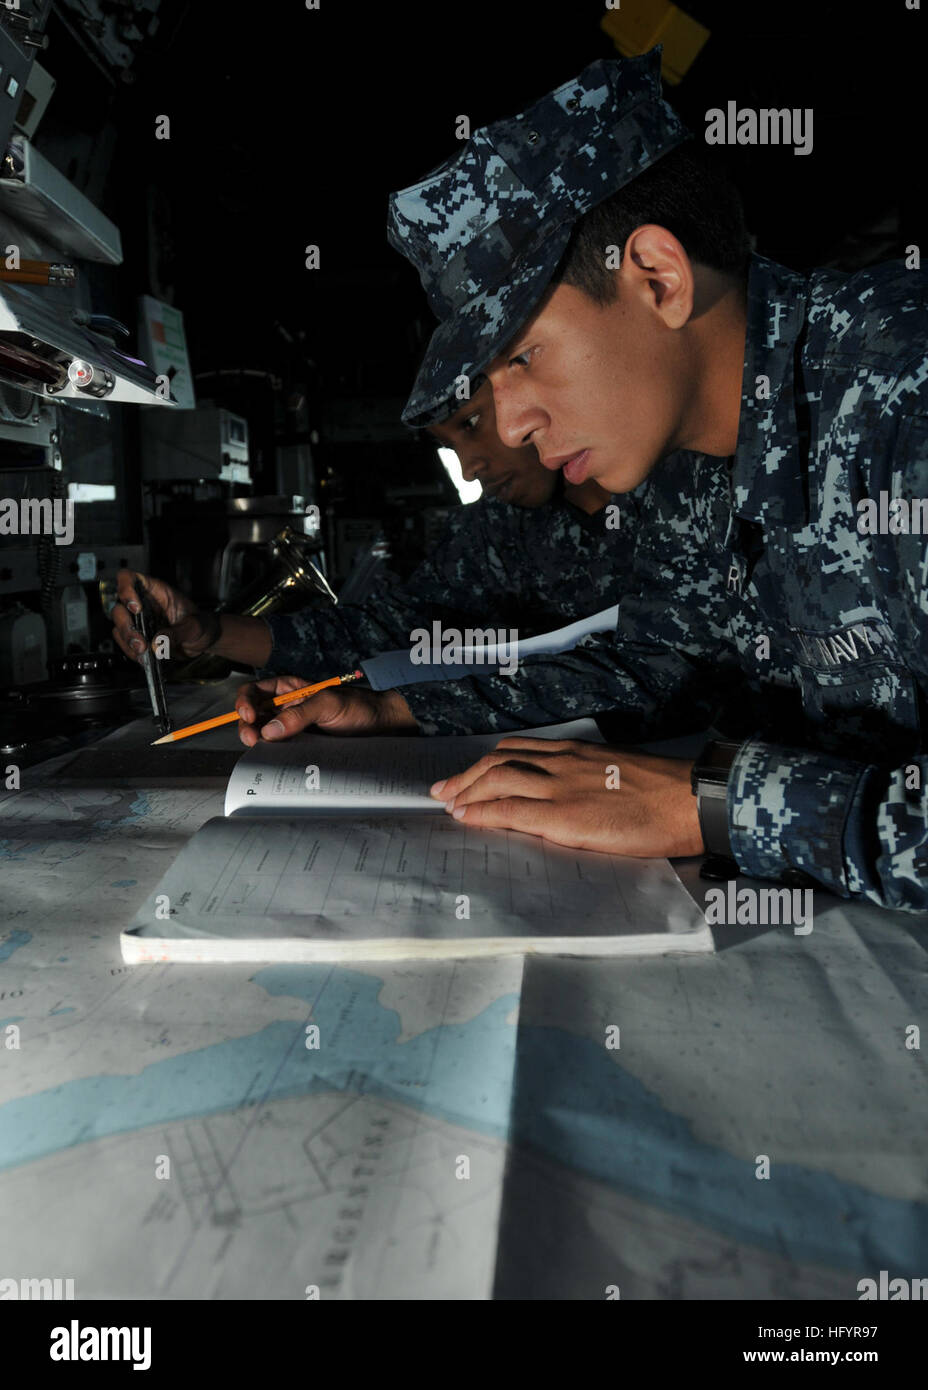 110509-N-NL541-126 ATLANTIC OCEAN (May 9, 2011) Quartermaster Seamen Quinntavius Wallace and Ephrain Rivera, both assigned to the guided-missile frigate USS Thach (FFG 43), perform nautical chart corrections while Thach is anchored off the coast of Rio Grande, Brazil. Thach is participating in the Atlantic phase of UNITAS 52 with the U.S. Coast Guard, and navies from Brazil, Mexico, and Argentina. (U.S. Navy photo by Mass Communication Specialist 3rd Class Stuart Phillips/Released) US Navy 110509-N-NL541-126 Sailors perform nautical chart corrections aboard Thach Stock Photo